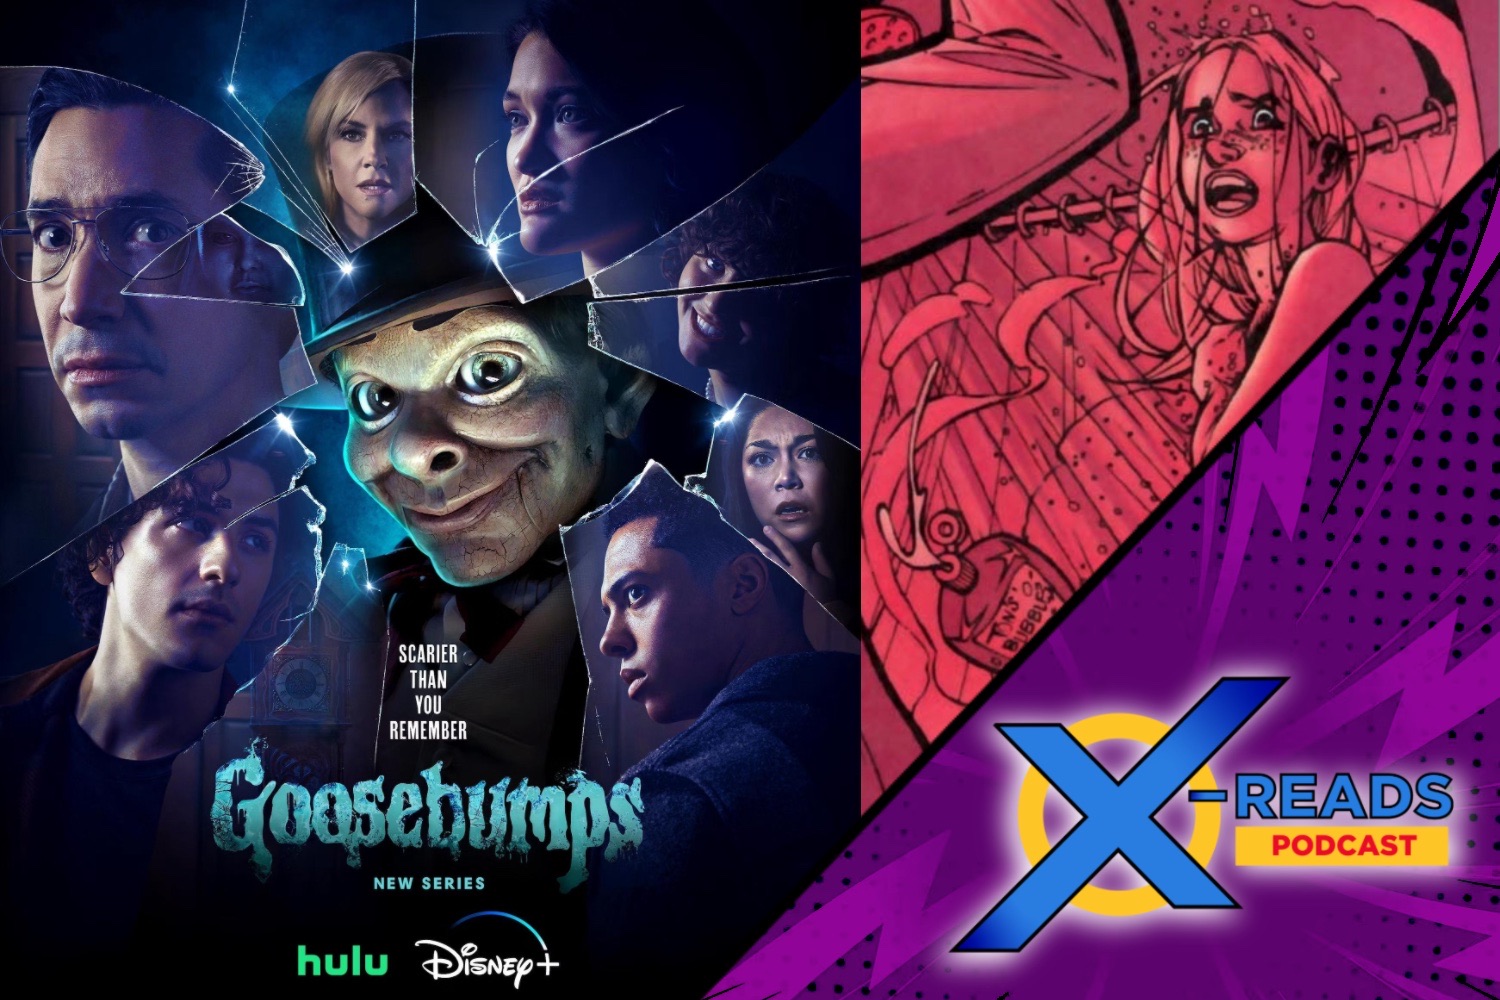 X-Reads Podcast Episode 110: Halloween Special: Guest Courtney Perdue on Goosebumps (Disney+) & Jubilee vs. Horror Icons